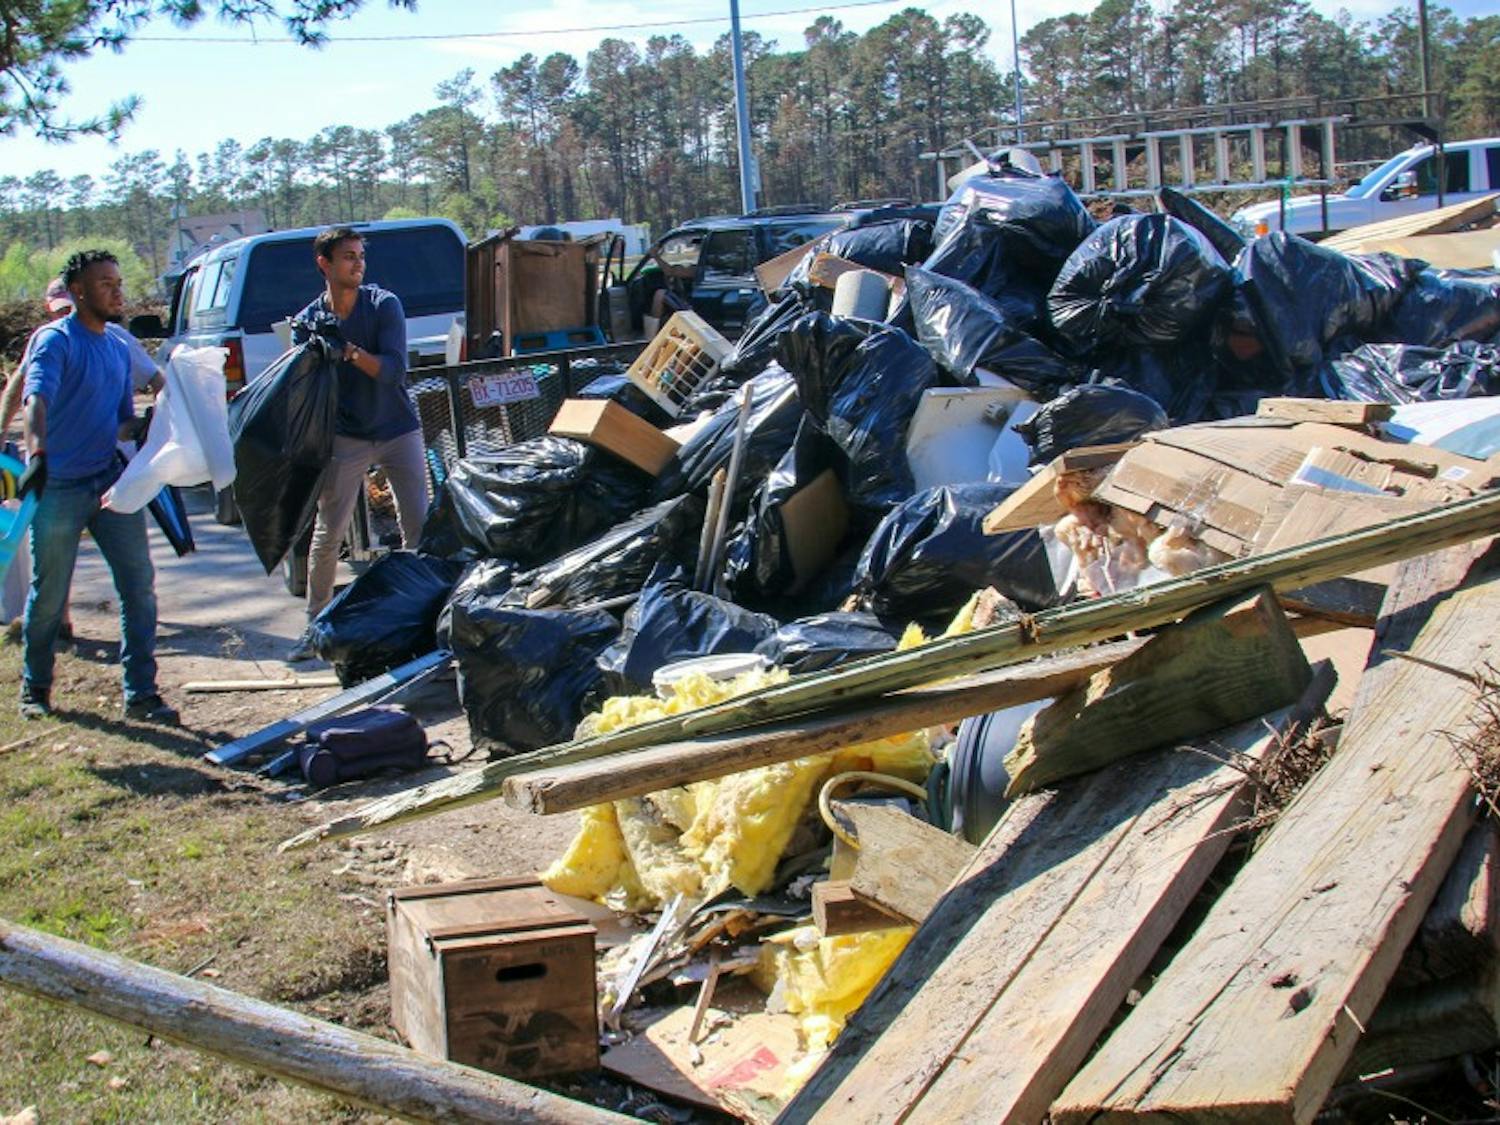 Duke undergraduates and graduate students came together to bring supplies and help clean houses damaged from Hurricane Florence in Carteret County, where the Marine Lab is located.